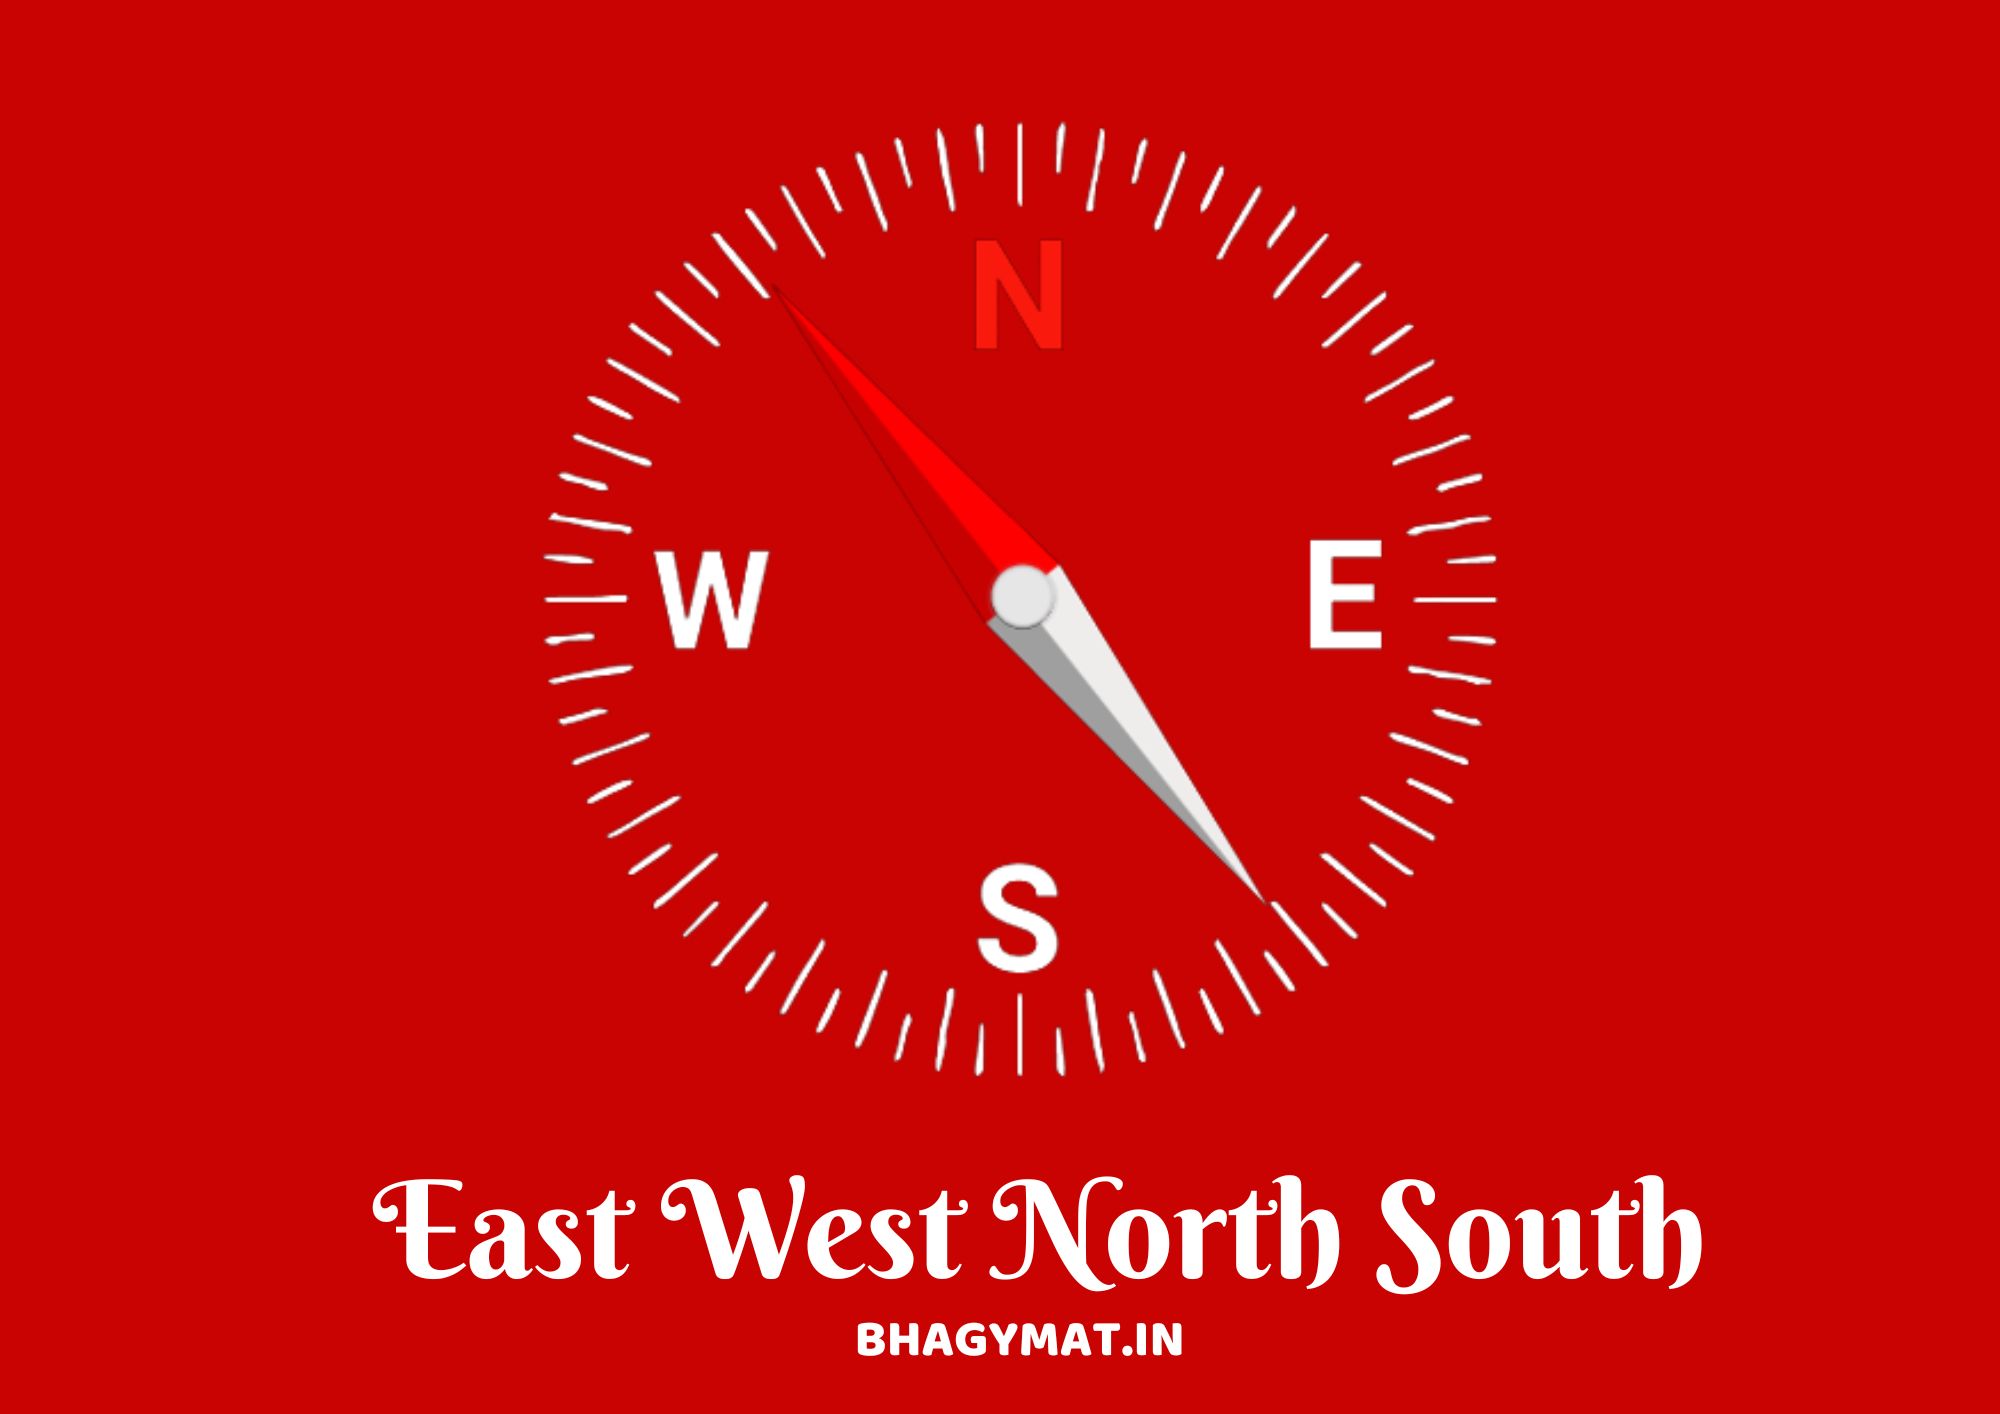 East West North South Direction In Hindi (South North East West In Hindi) - East West North South In Hindi And English